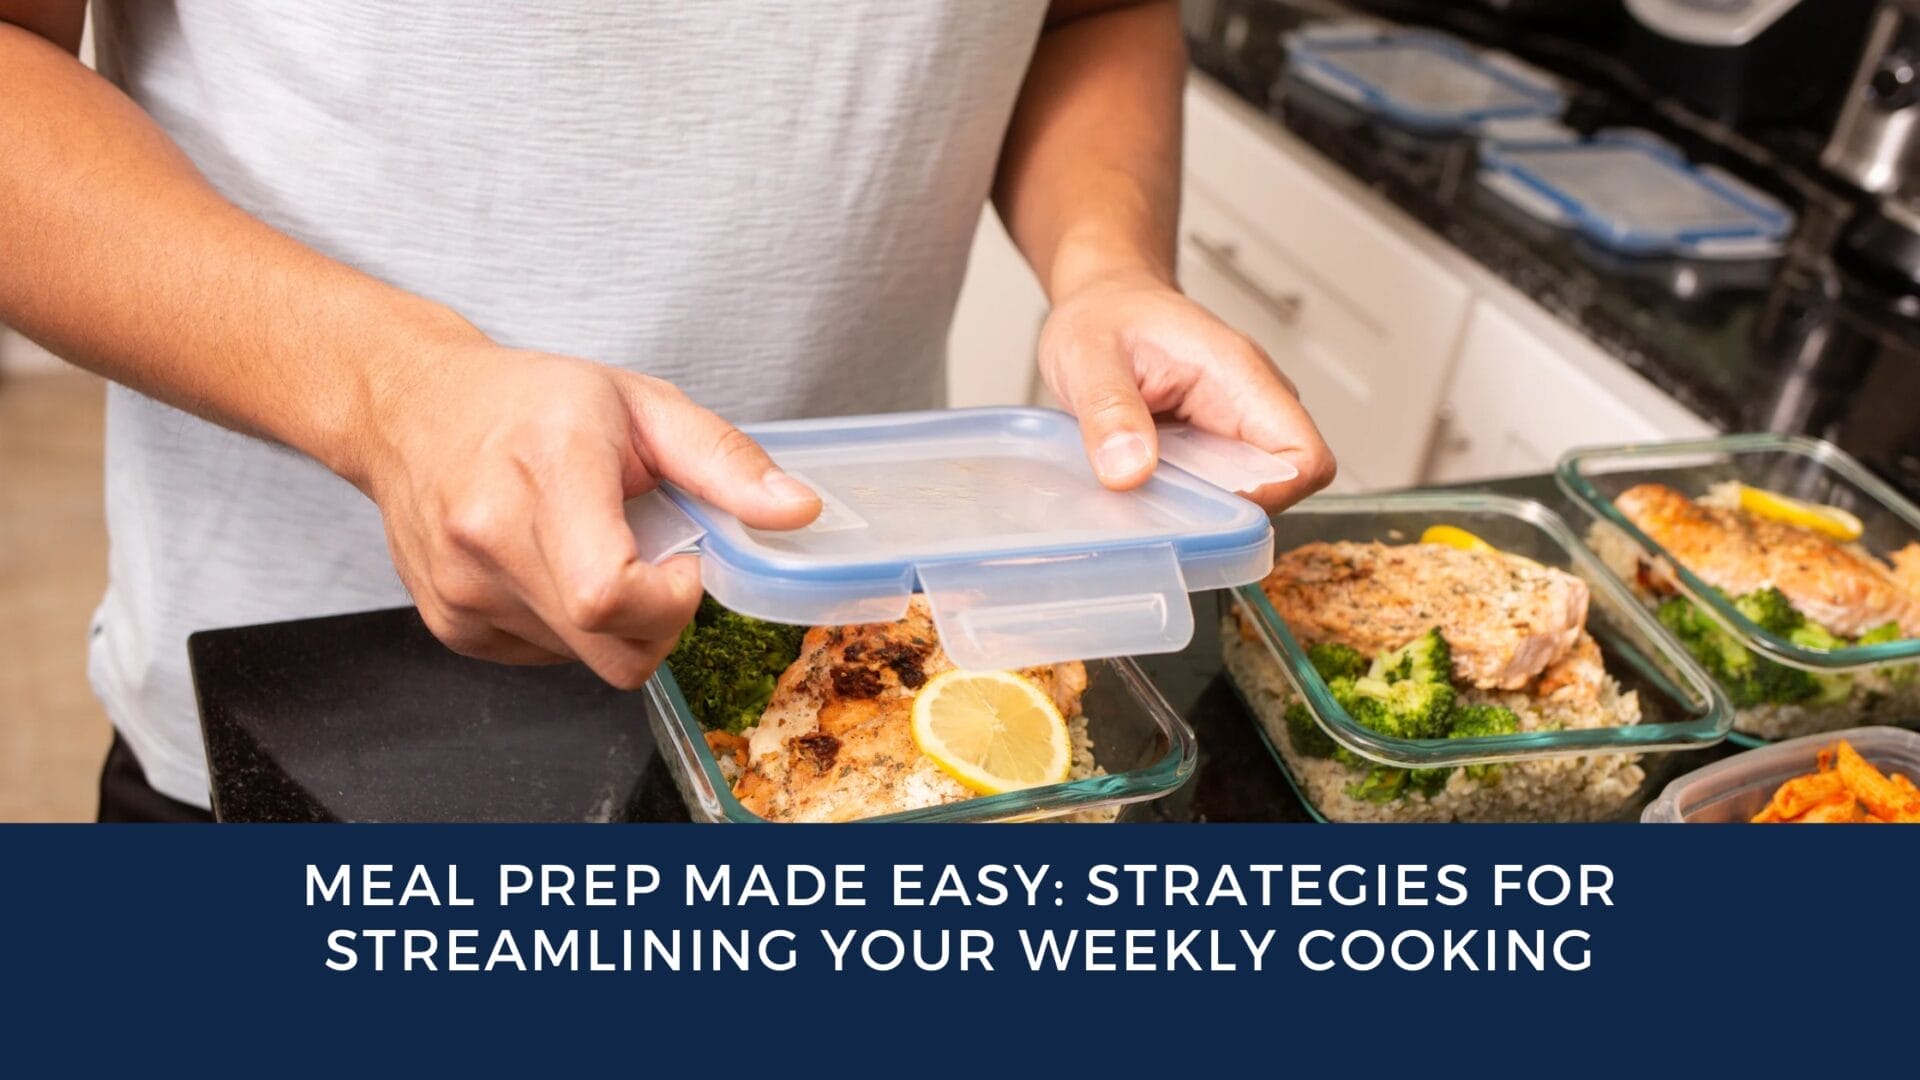 Meal Prep Made Easy: Strategies for Streamlining Your Weekly Cooking